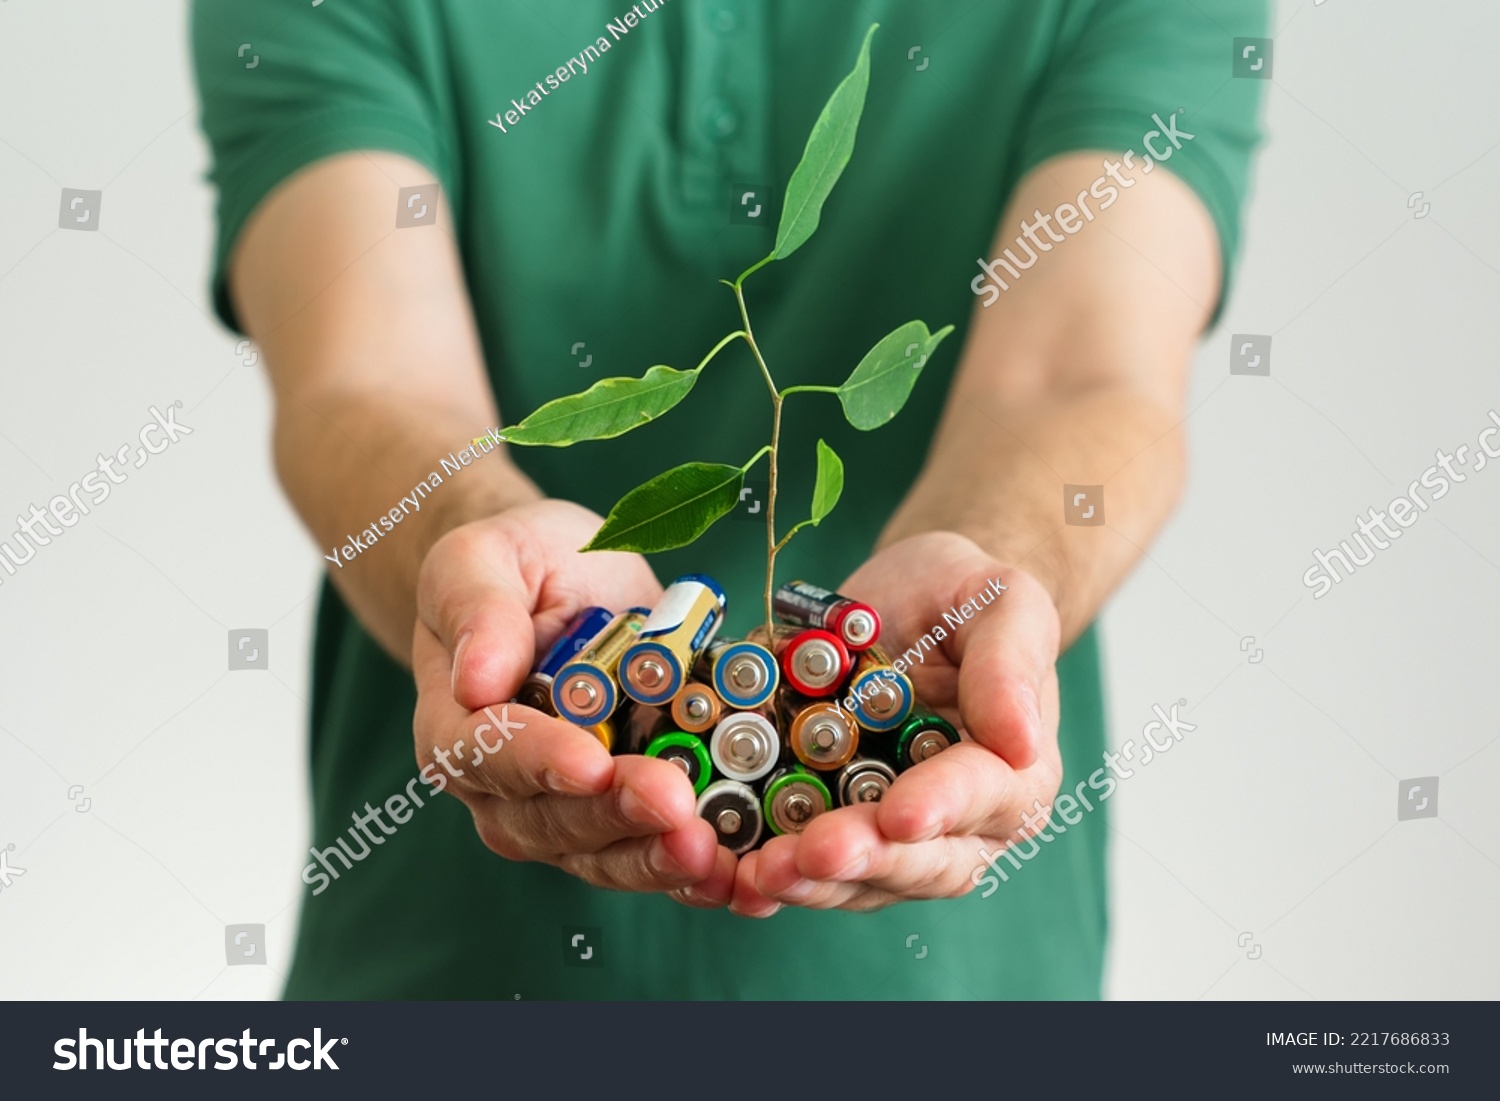 Leaf grows from a Alkaline batteries in hands. Green energy a symbol of clean energy resources. Concentration of waste recycling and environmental pollution #2217686833